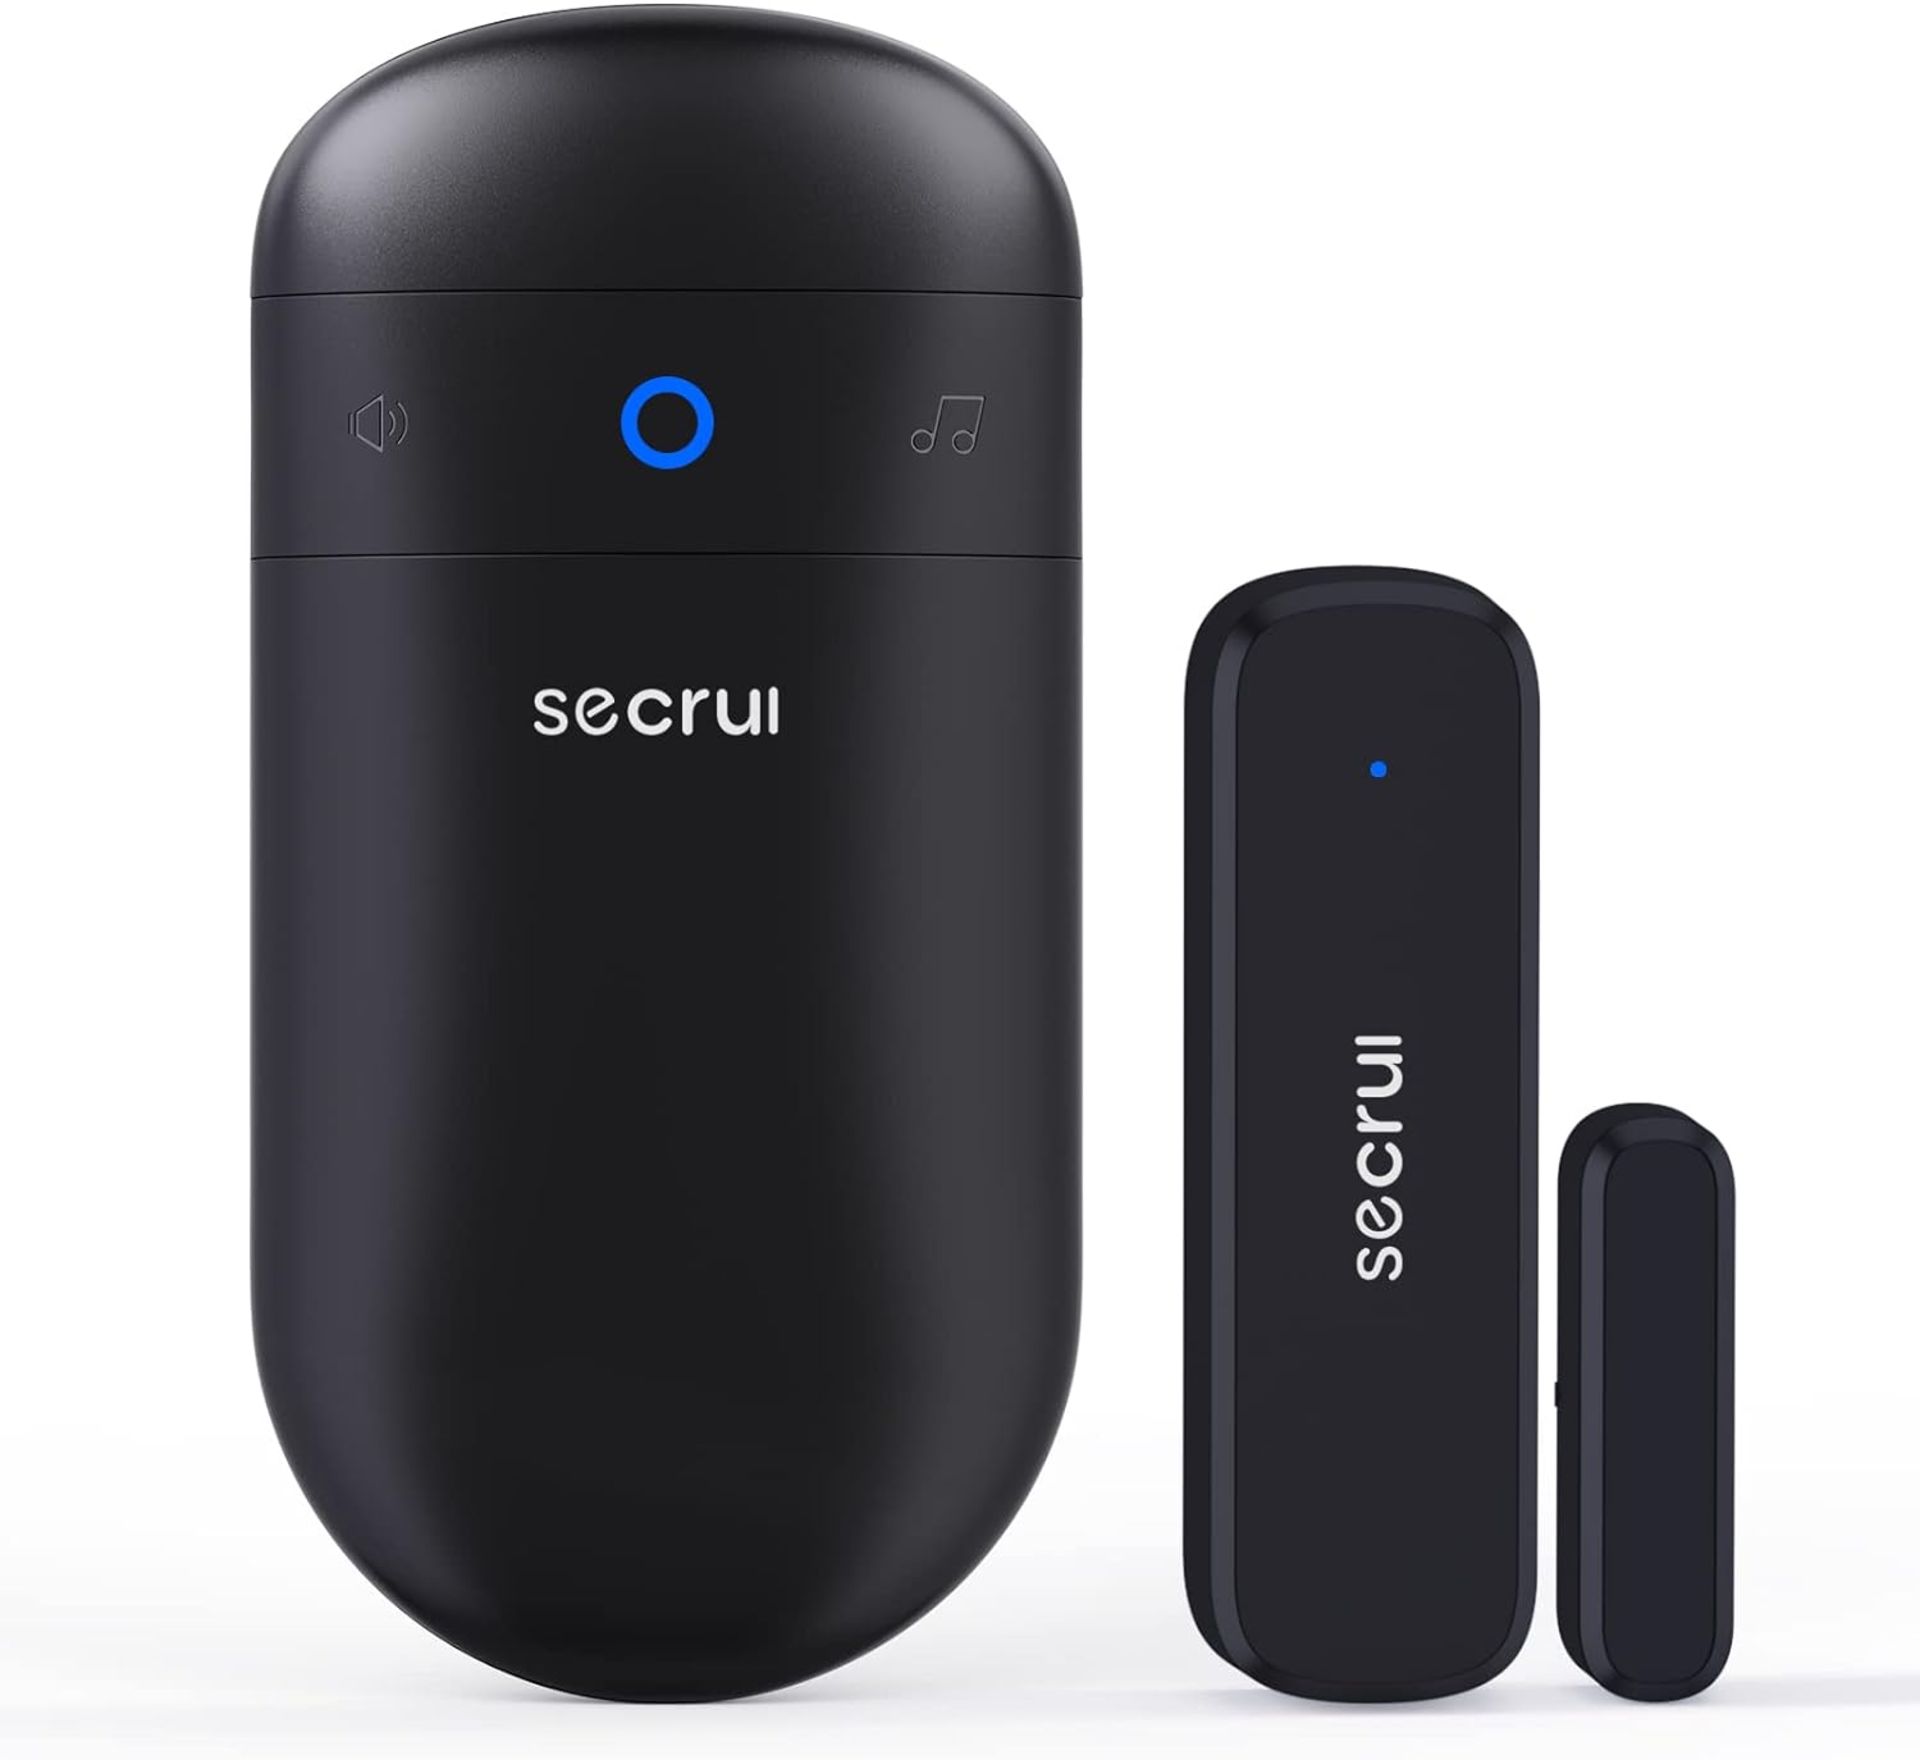 Approximate RRP £200, Box of SECRUI Wireless Doorbell and SECRUI Wireless Sensor Alarms, 10 Pieces - Image 2 of 4